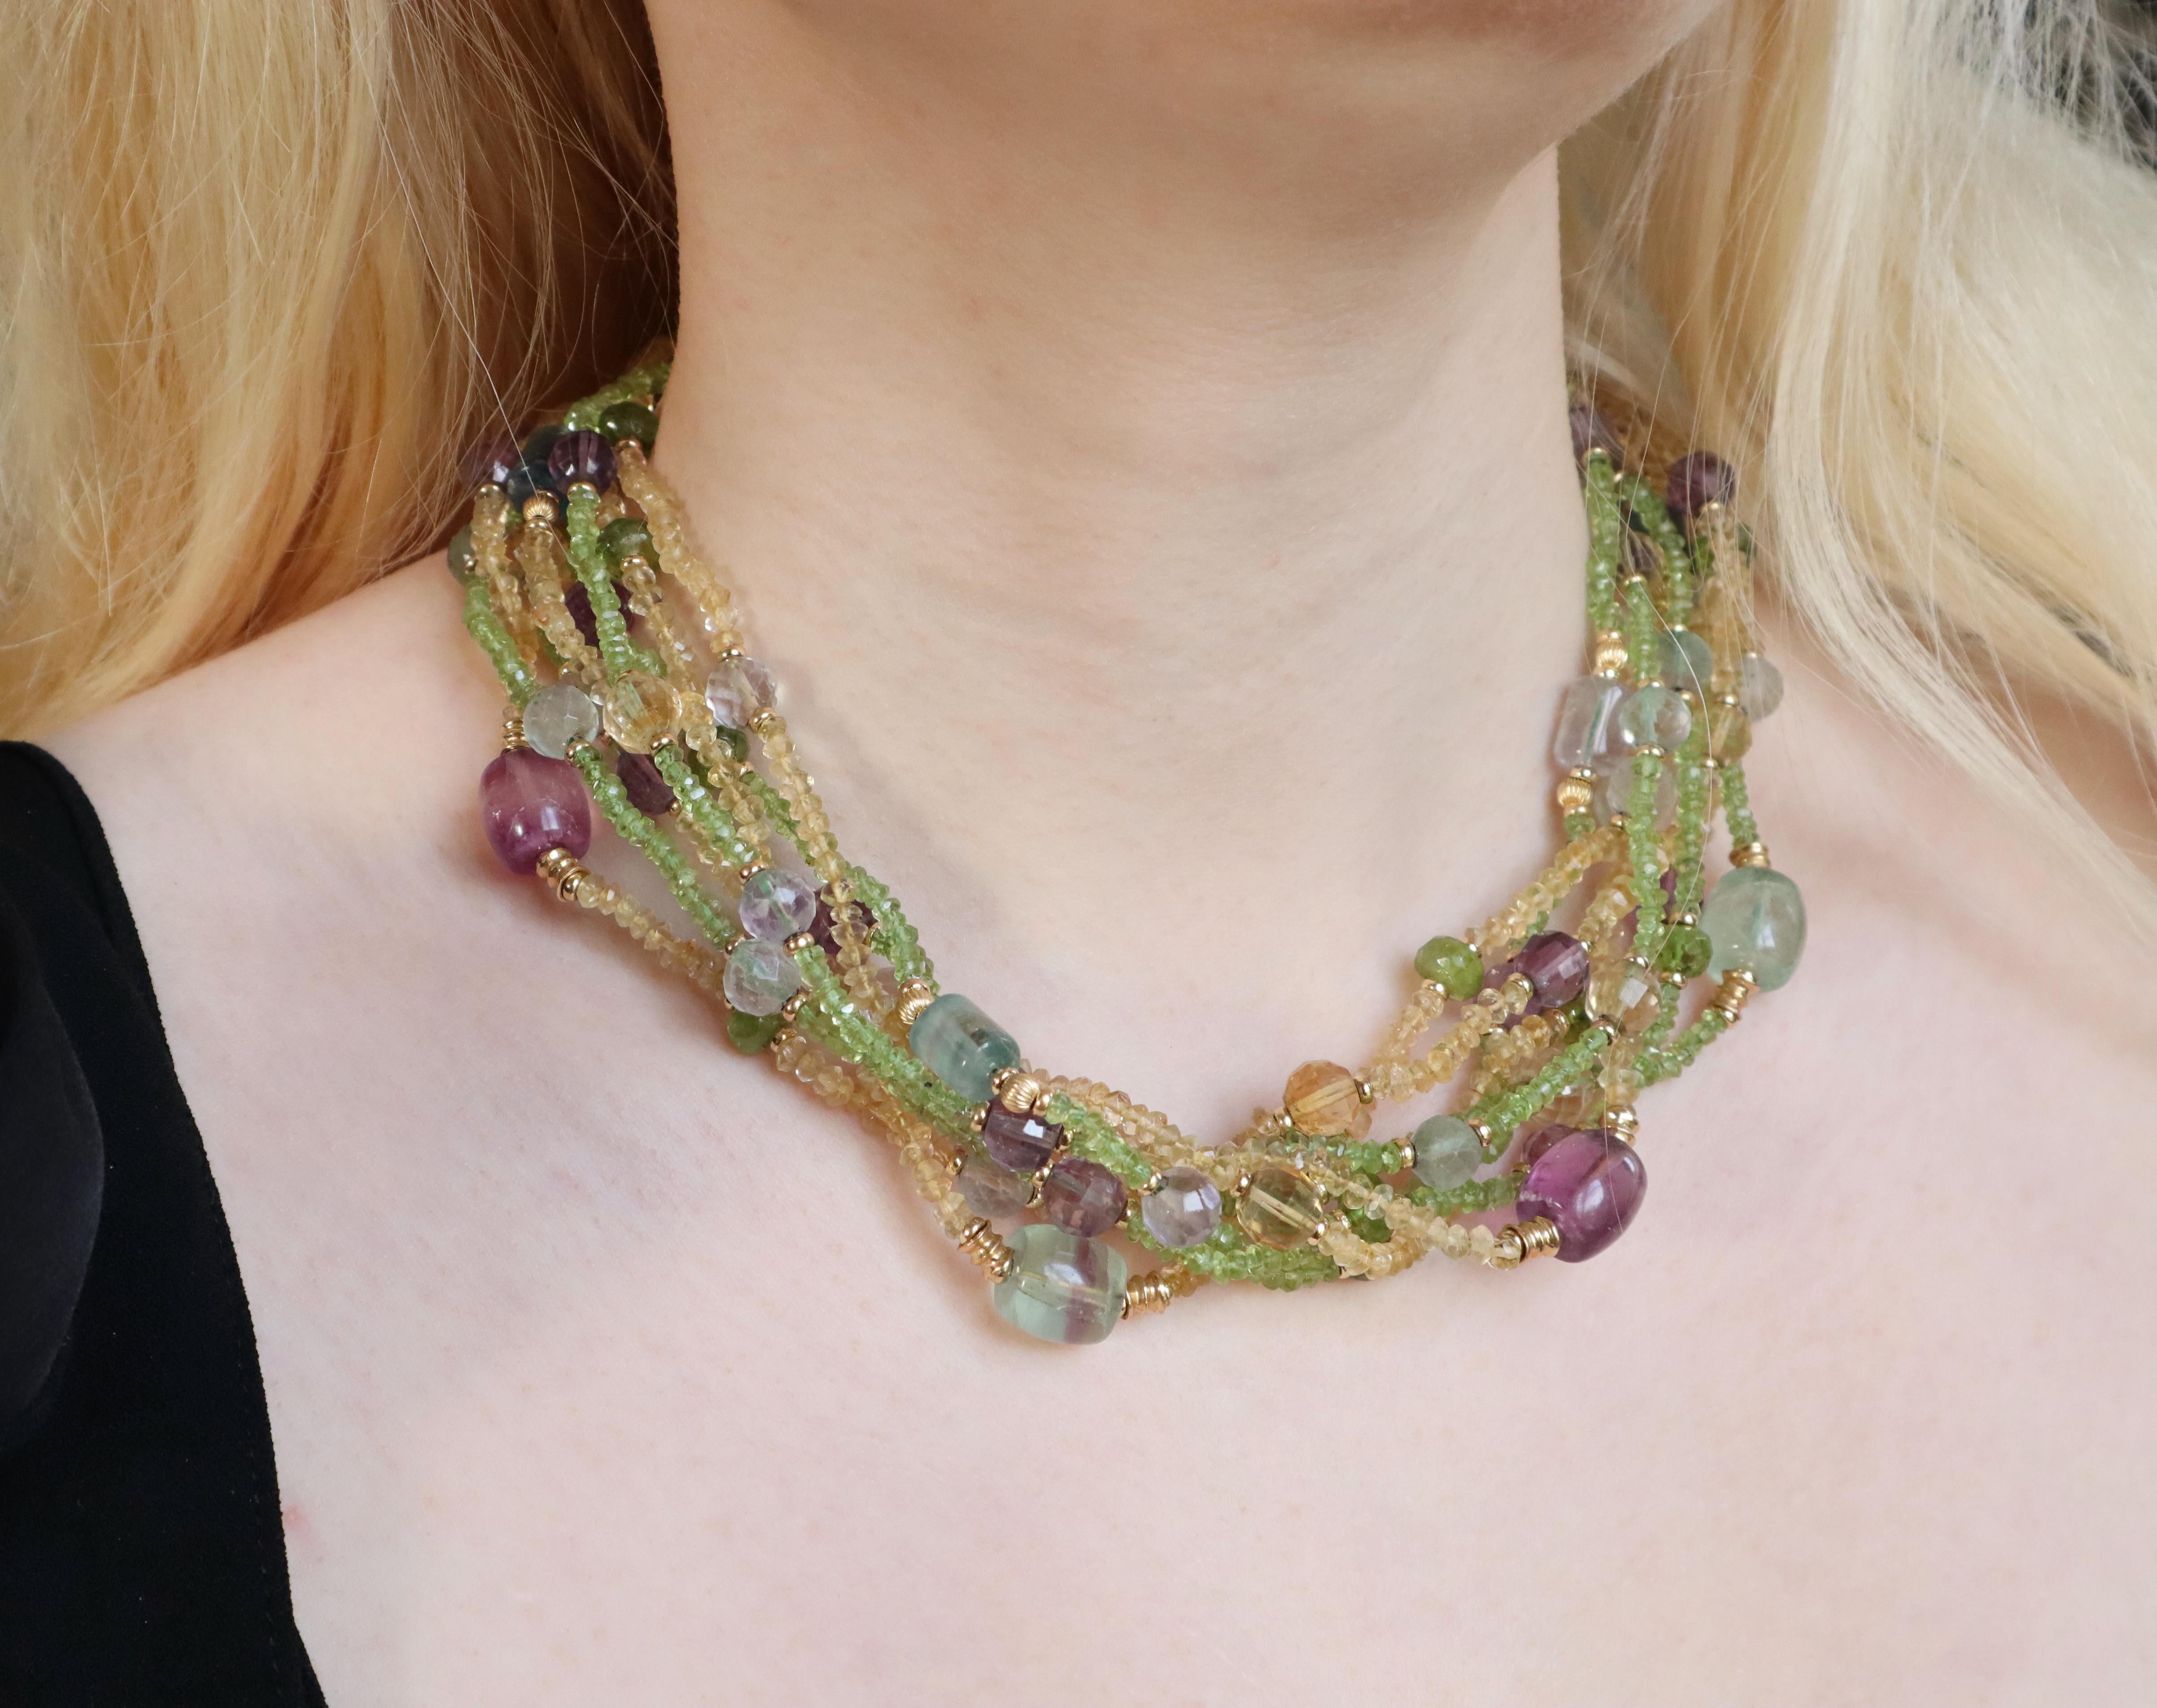 Eight row necklace in 18 kt yellow gold composed of amethysts, peridots, citrines. Citrine and peridot bead strands punctuated with large amethyst pearls and other fine stones, with 18 carats yellow gold balls and ferrules. 
Length 46 cm; width 4